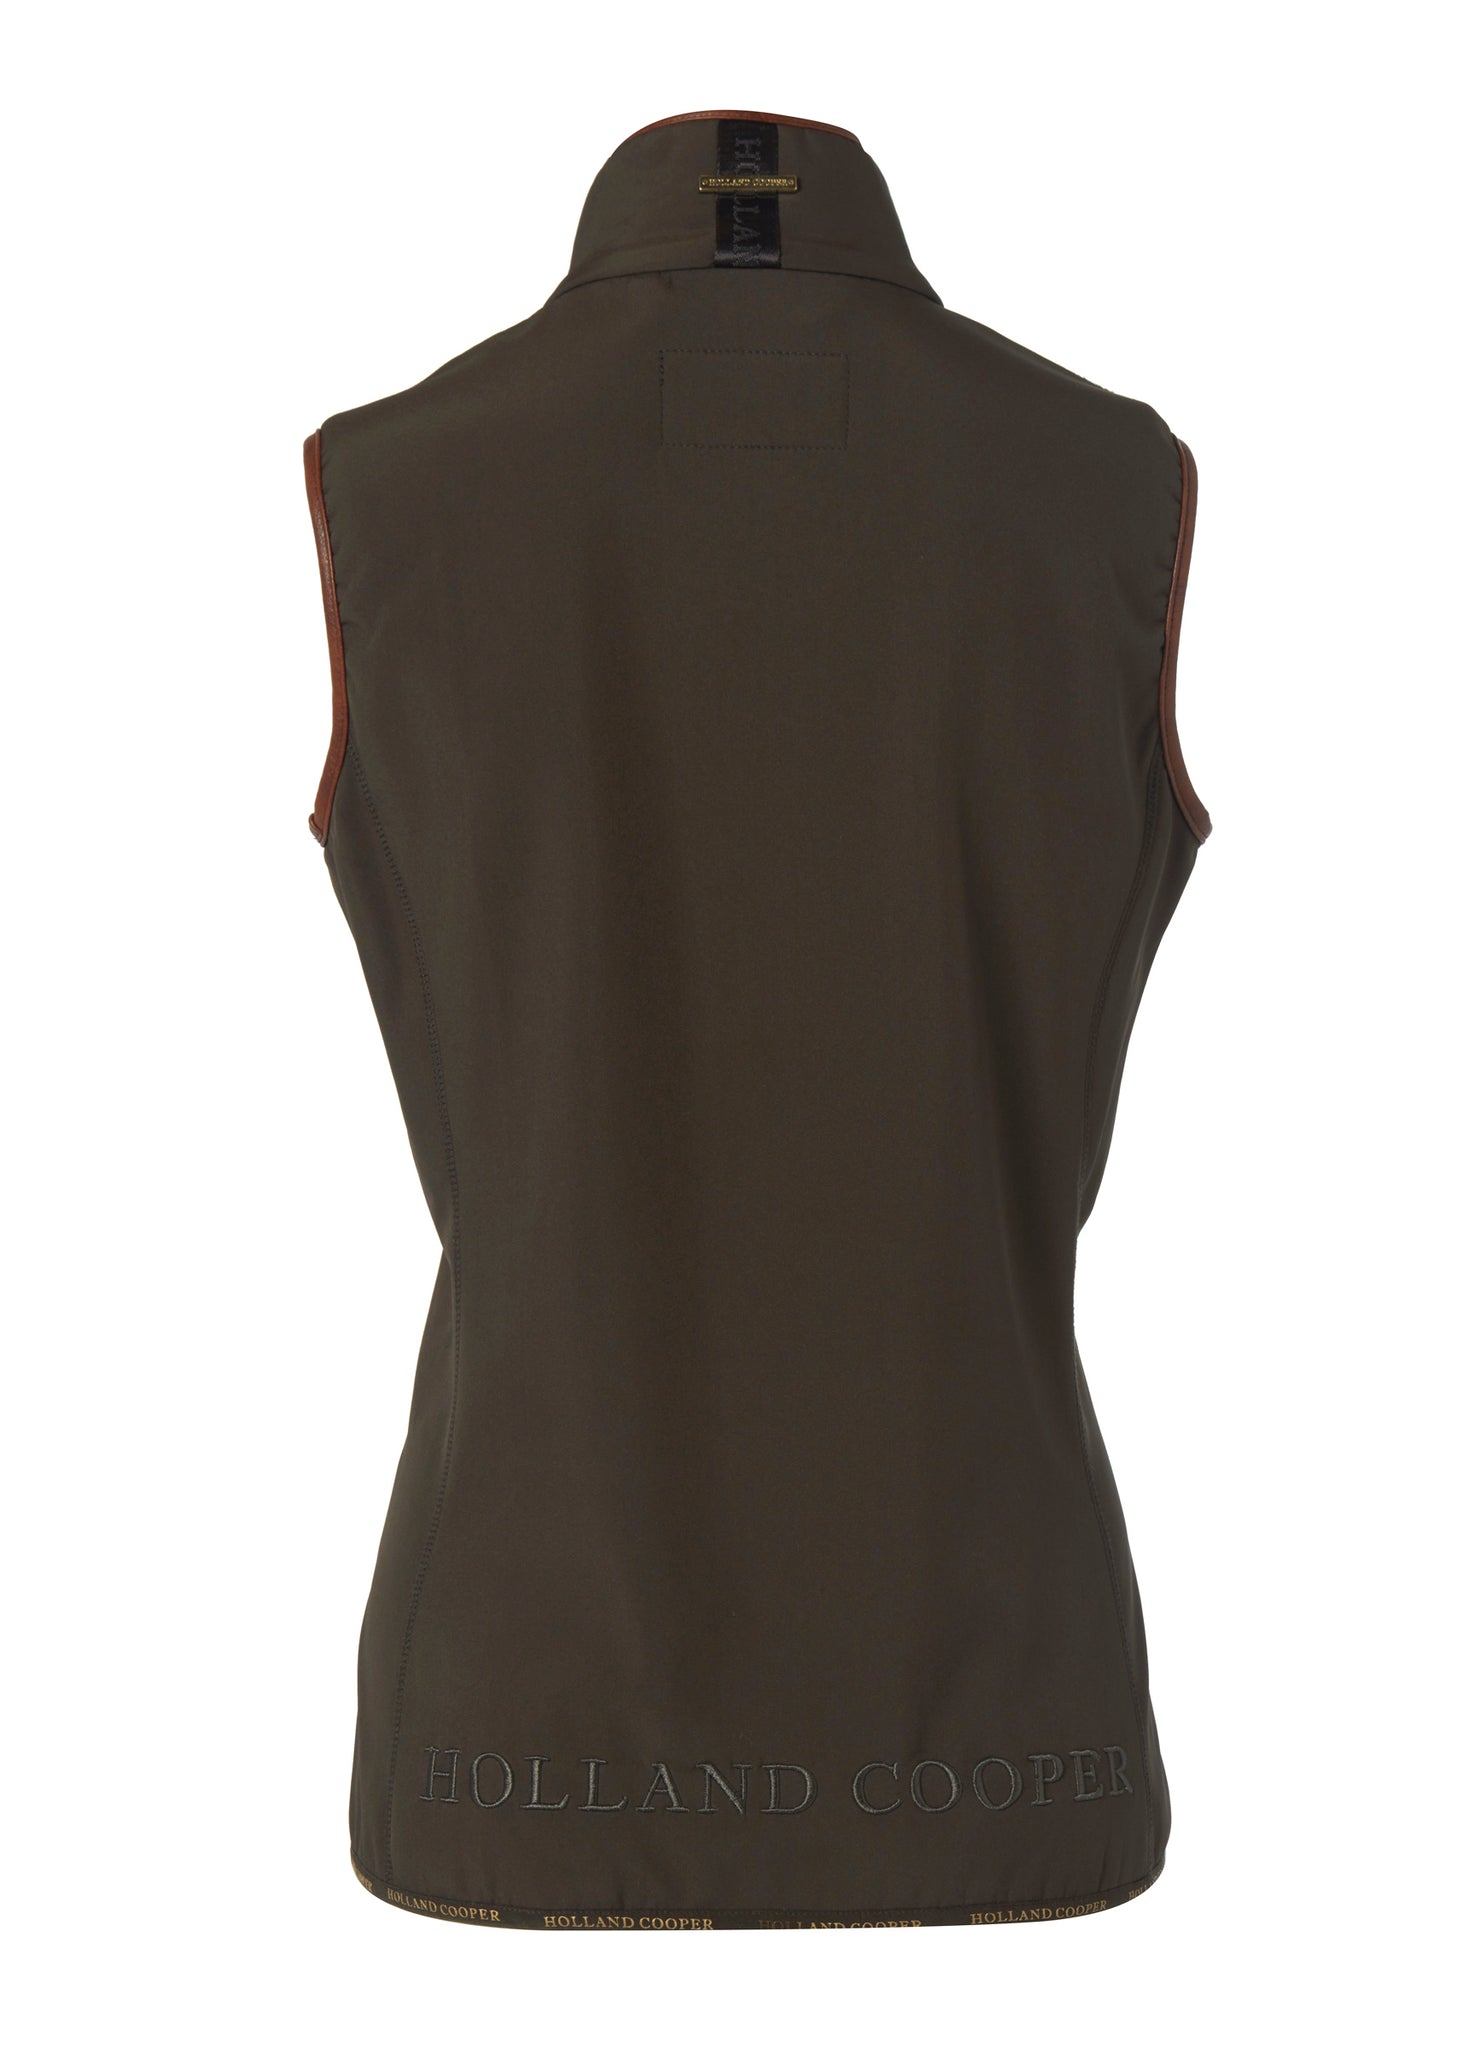 back of womens khaki gilet with dark brown leather seams and a logo across the bottom seam and on the collar